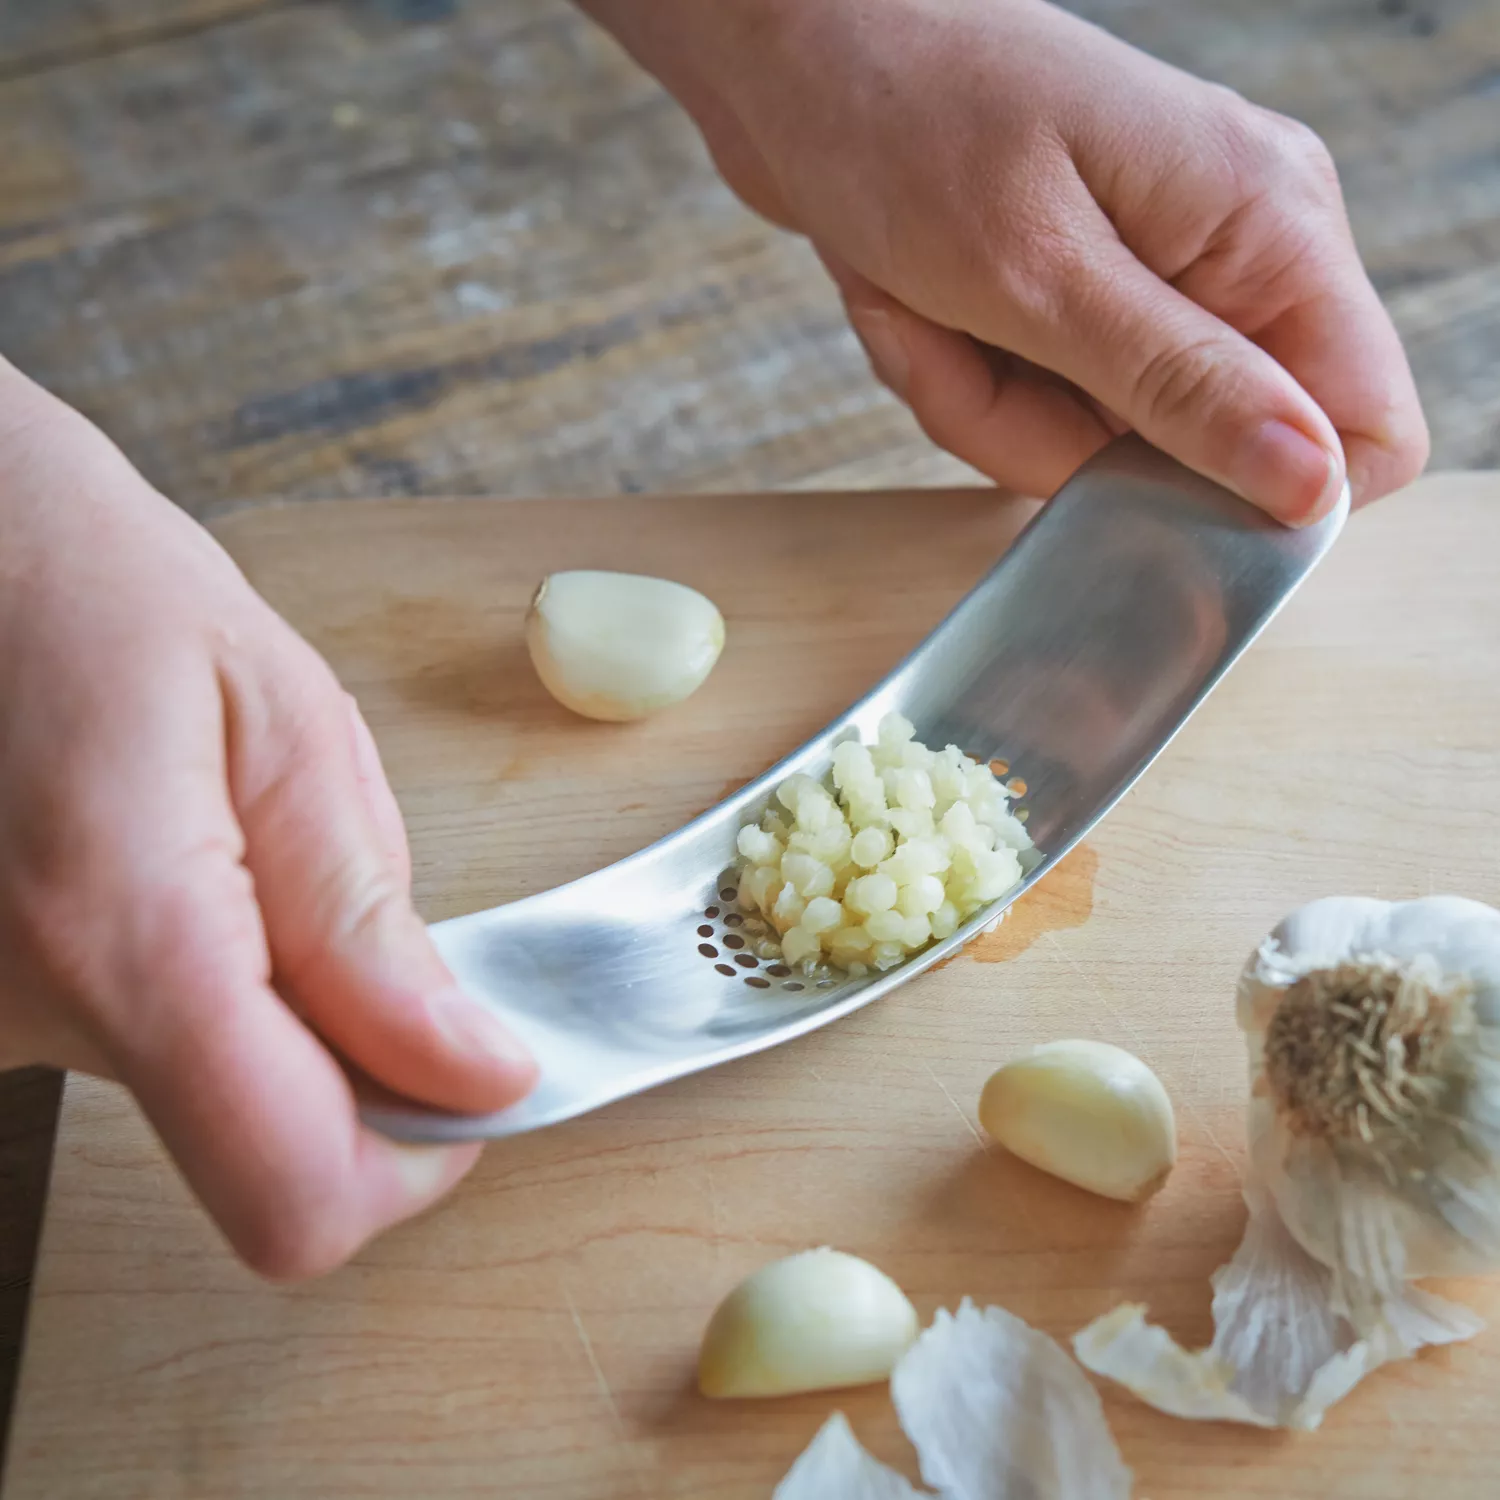 New OXO Good Grips Garlic Slicer - Slices Garlic Quickly, Safely & Evenly